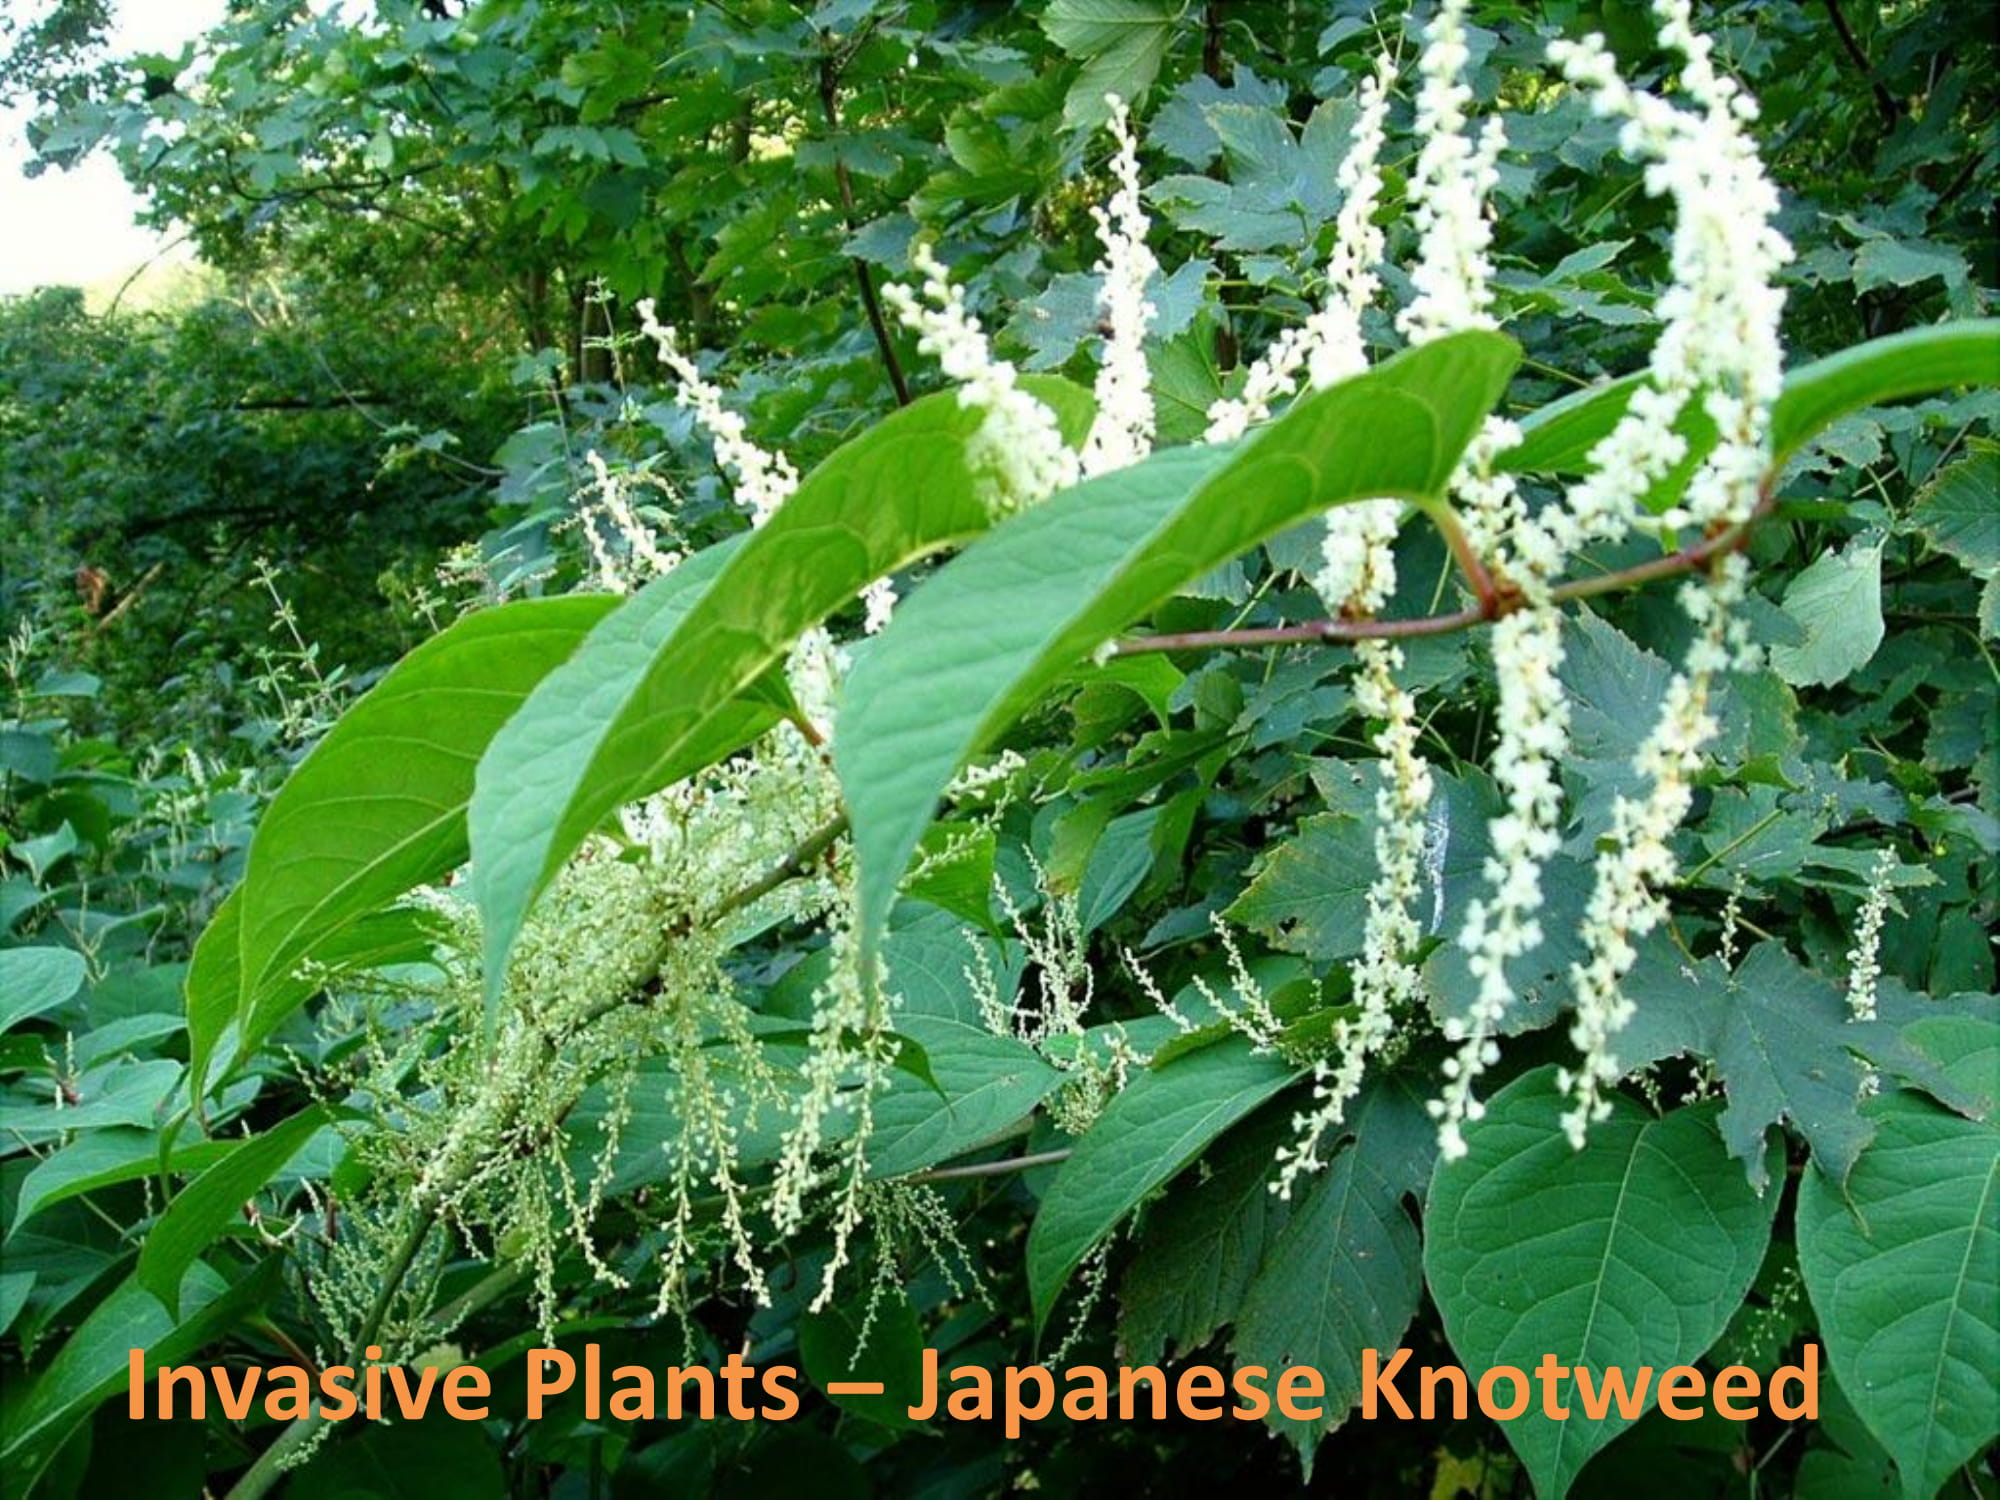 Hedges becoming ‘overrun’ with Japanese knotweed in areas